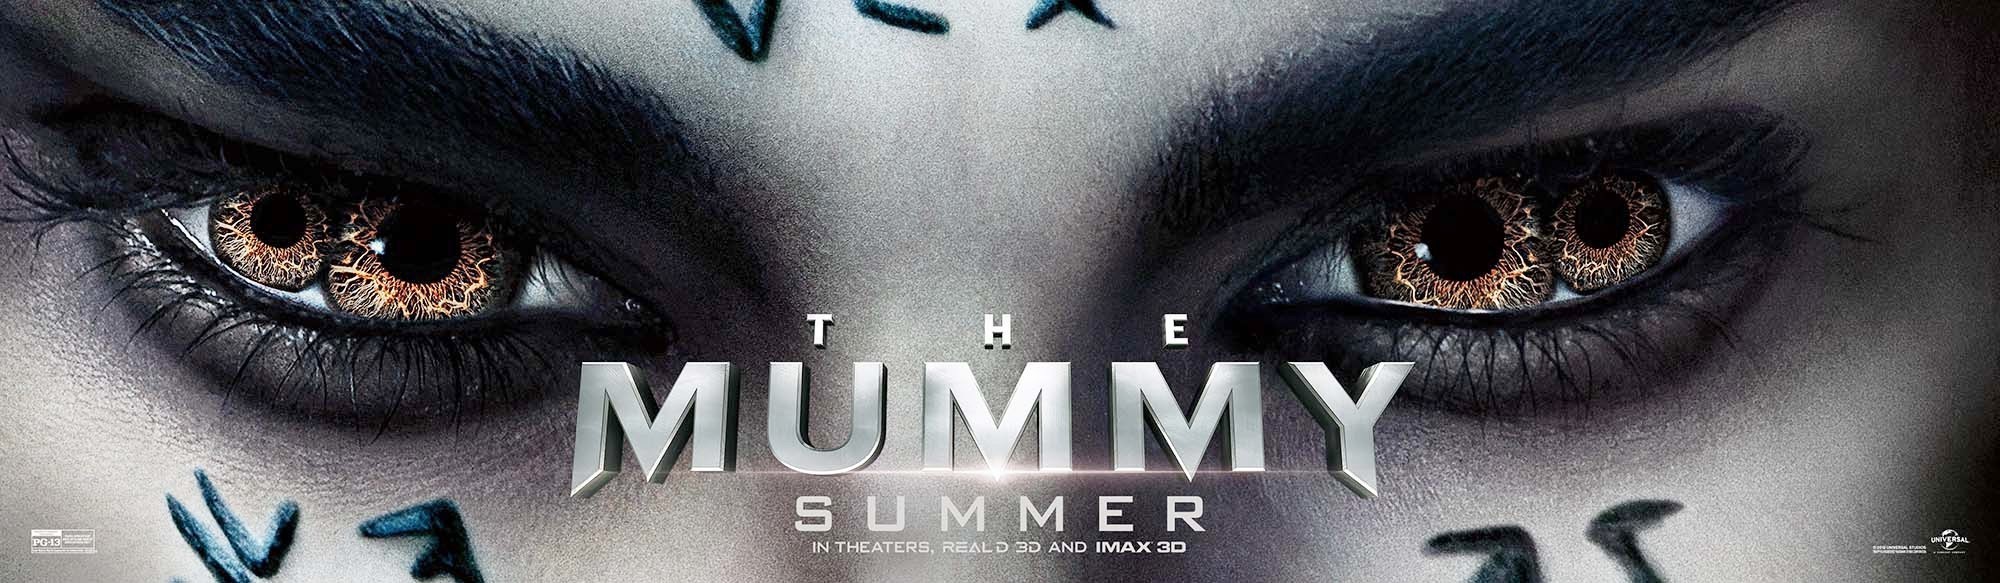 Poster of Universal Pictures' The Mummy (2017)